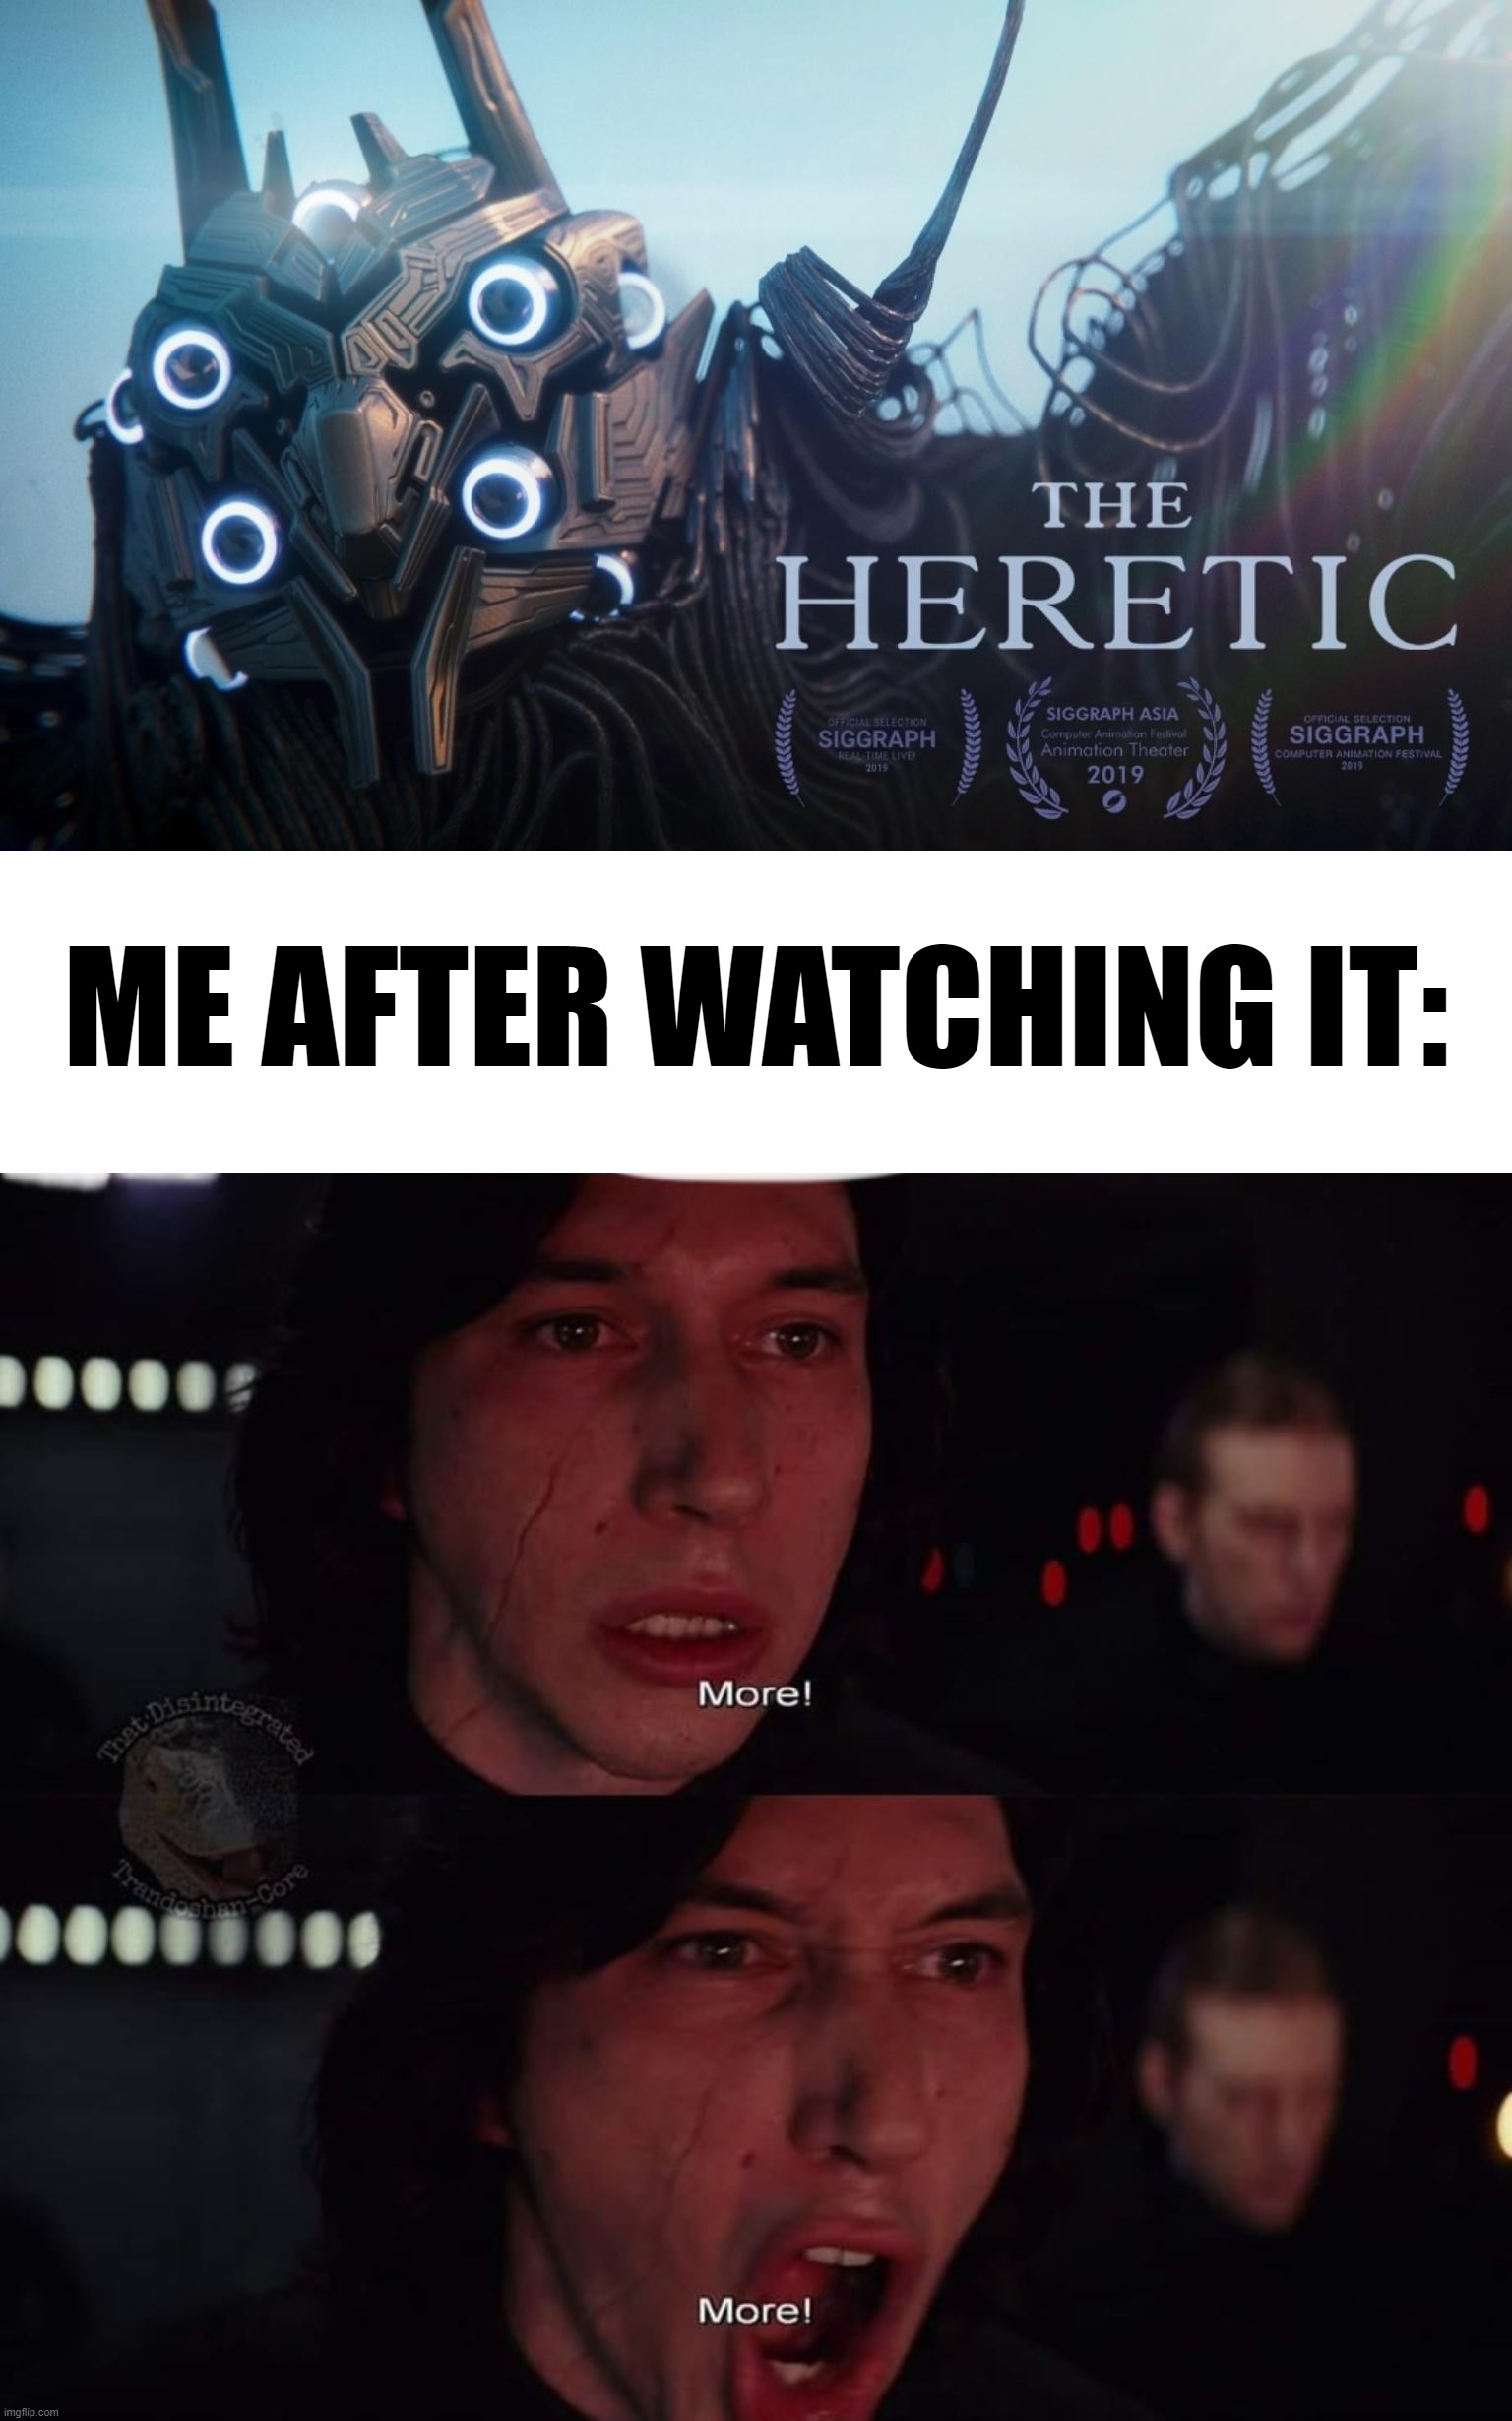 ME AFTER WATCHING IT: | image tagged in memes,blank transparent square,kylo ren more,the heretic | made w/ Imgflip meme maker